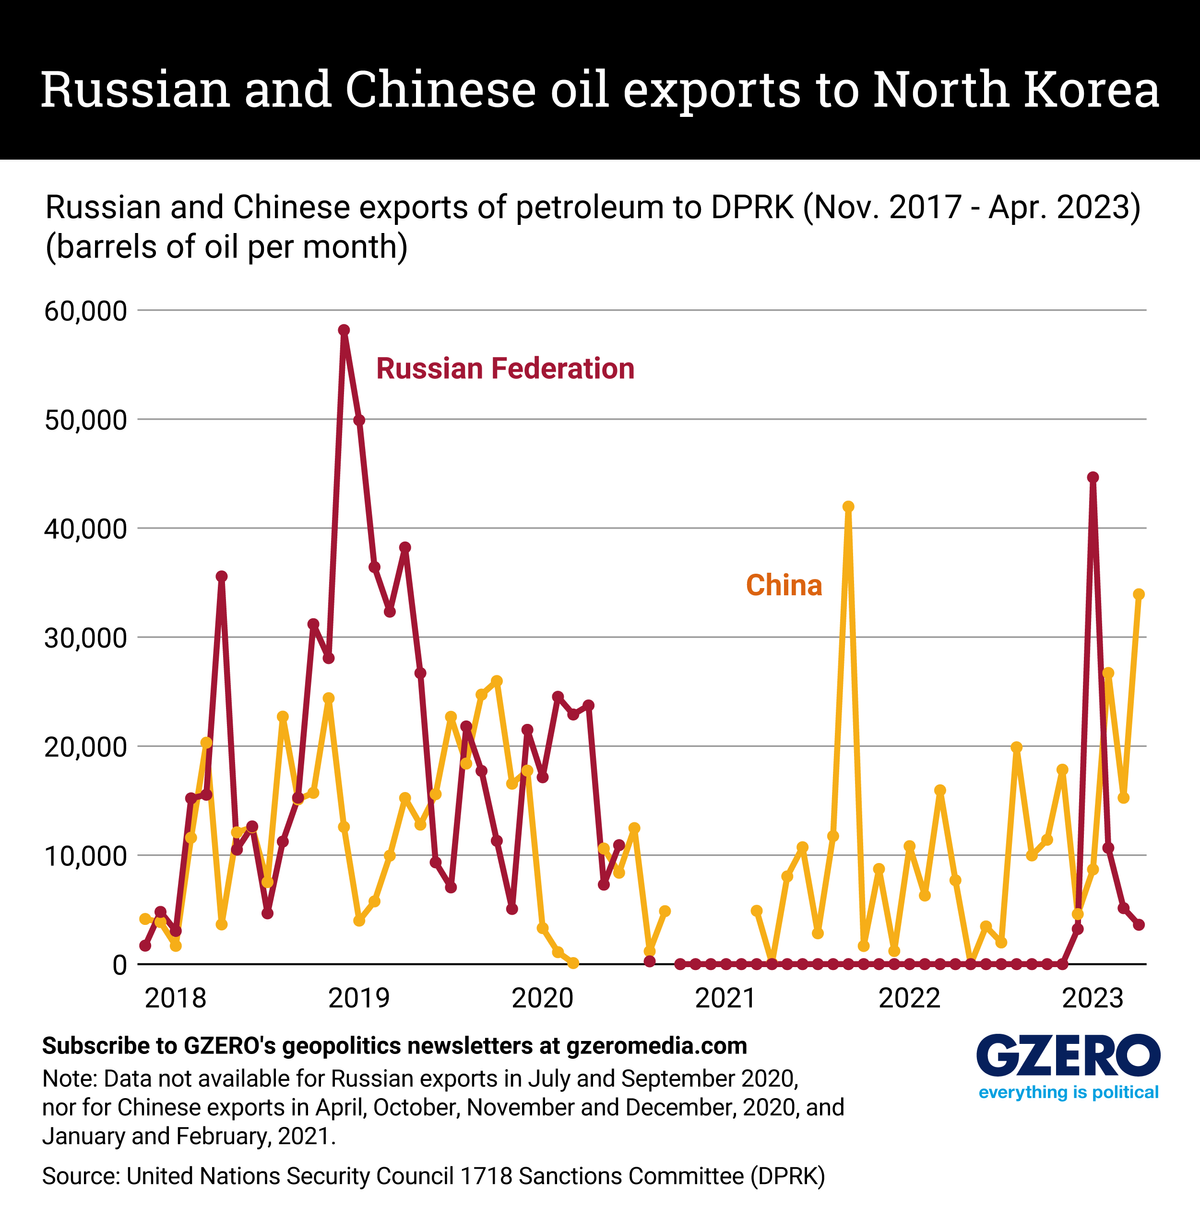 The Graphic Truth: Russian and Chinese oil exports to North Korea